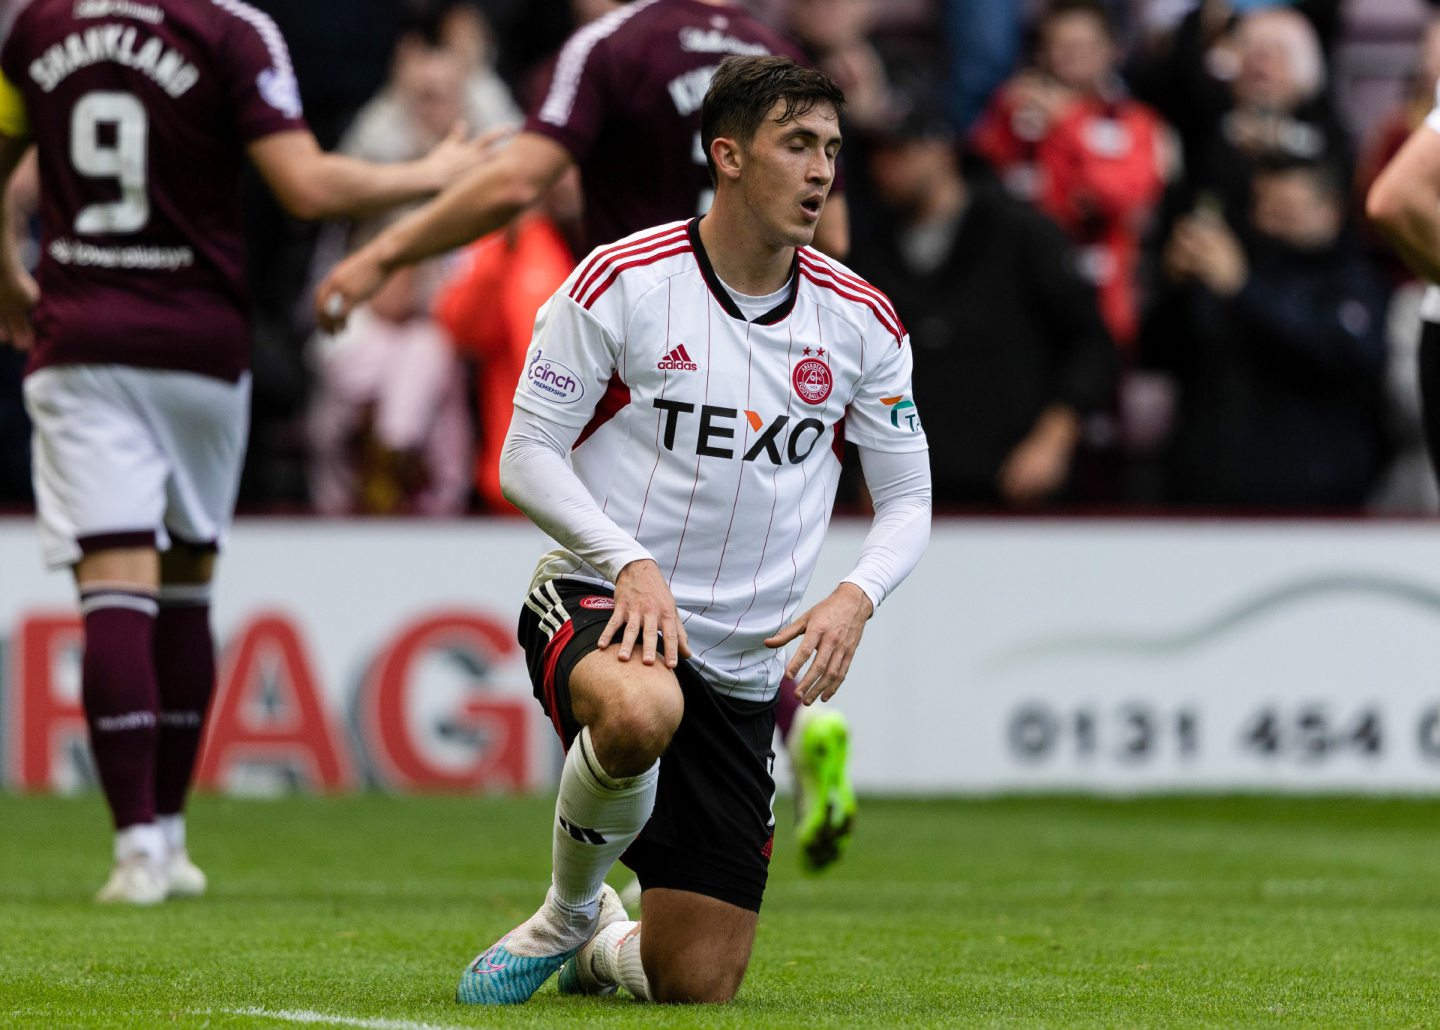 Aberdeen's Jamie McGrath looking dejected on one knee on the pitch